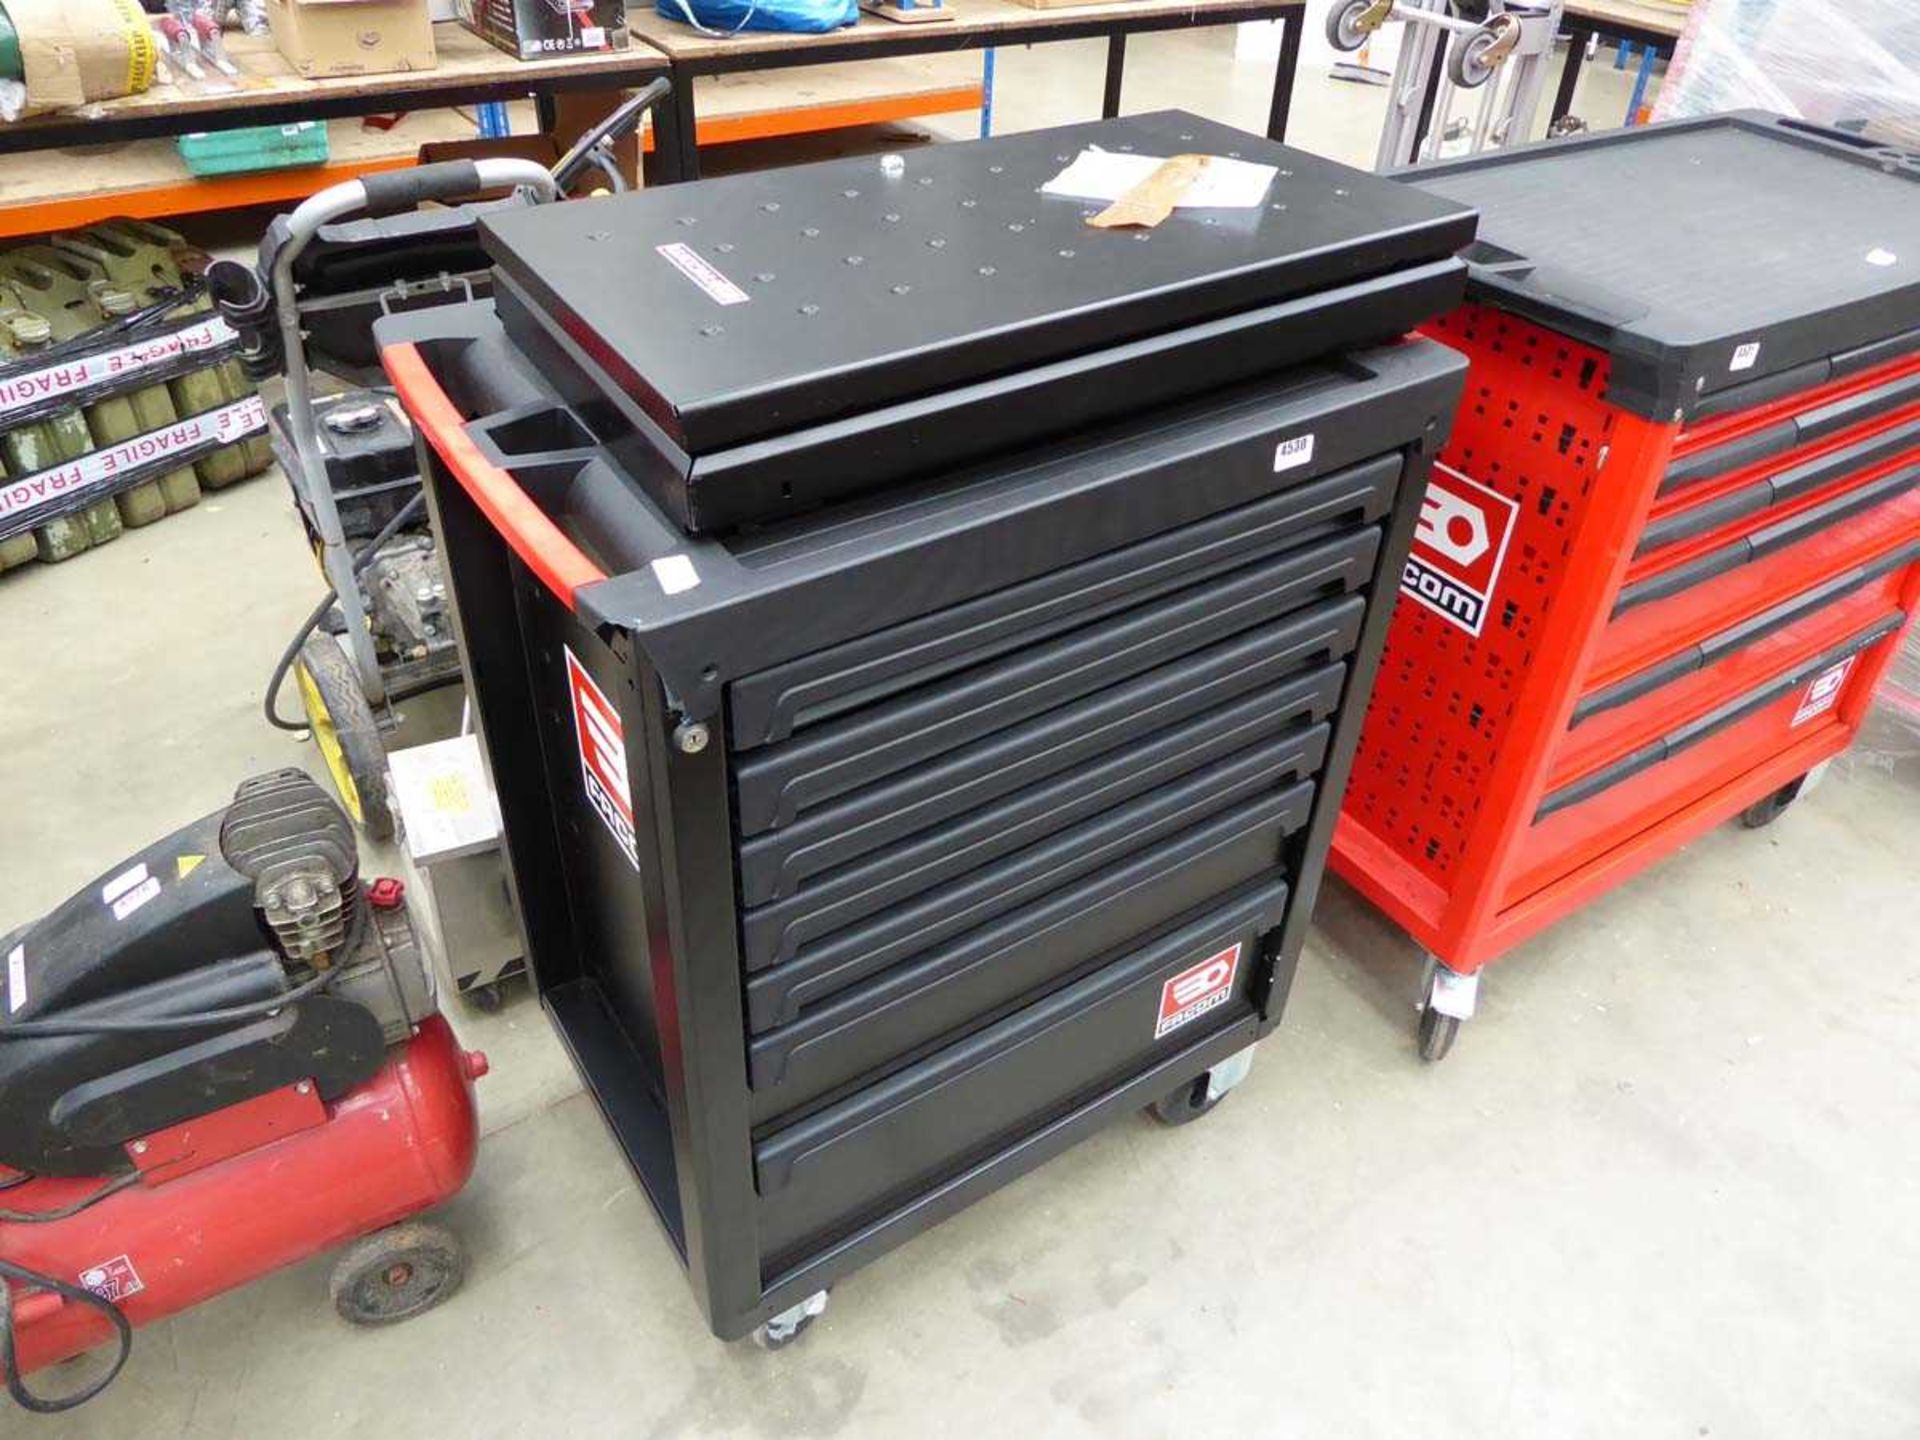 Facom wheeled toolbox with drawers